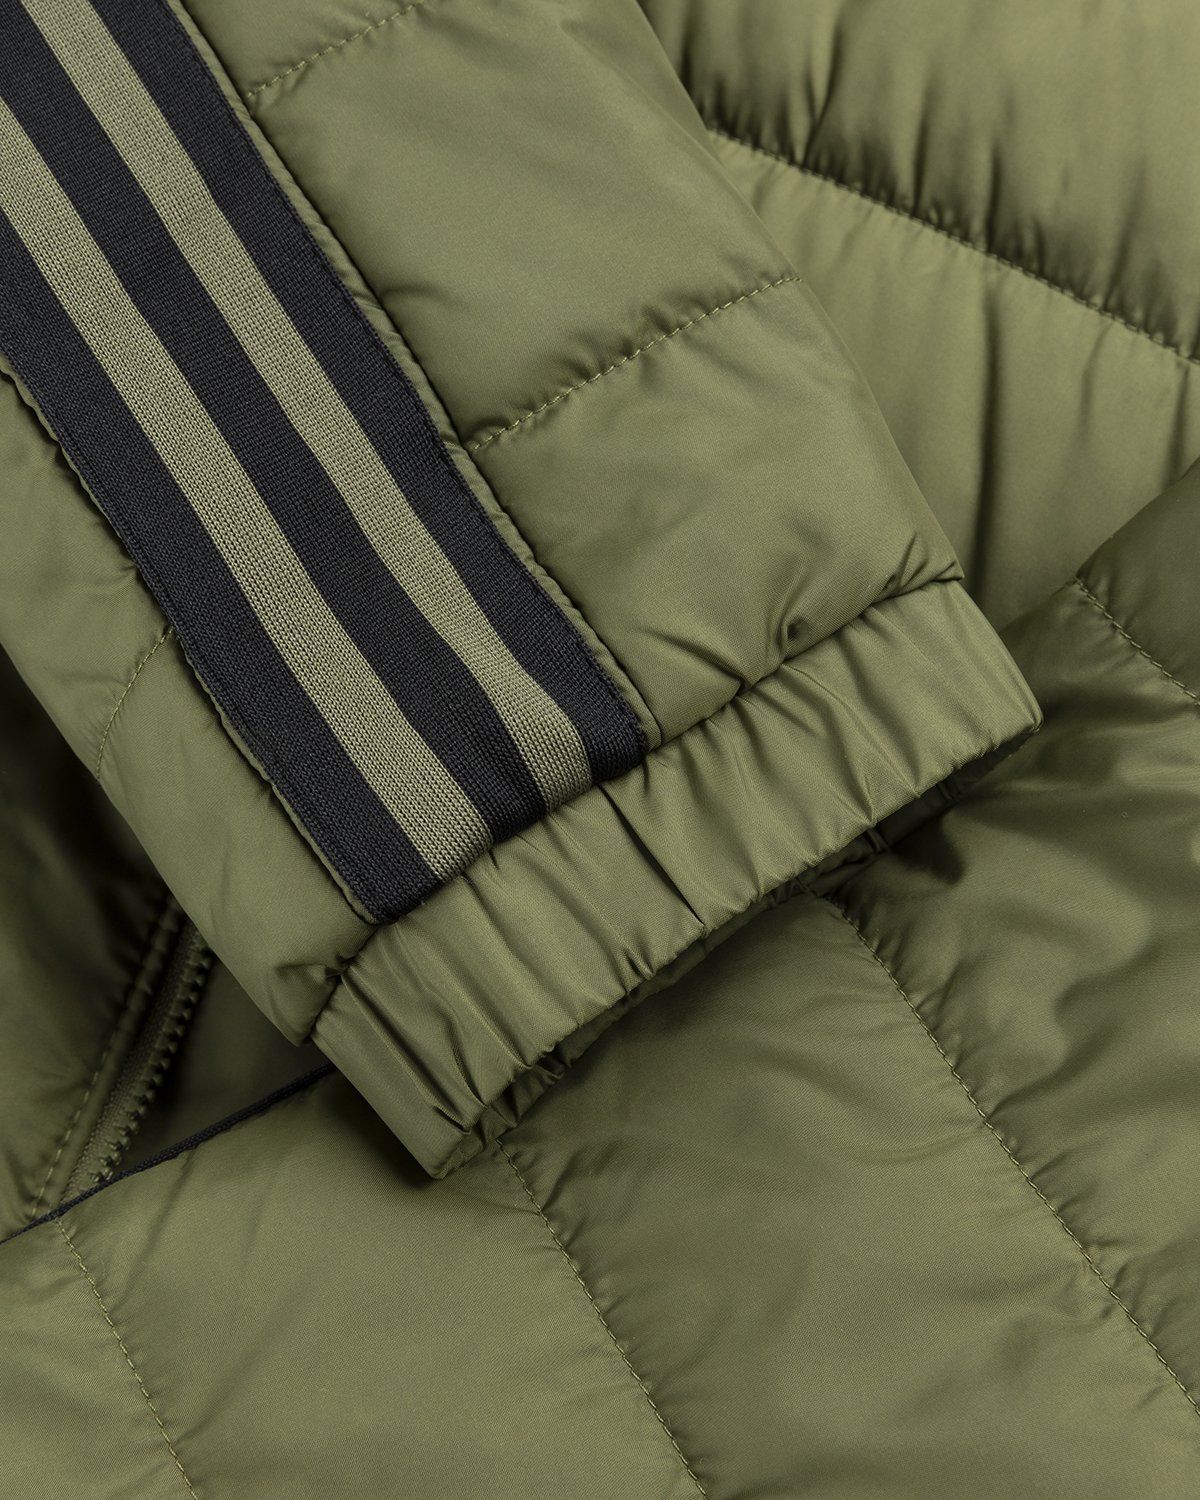 Adidas – Itavic 3-Stripes Midweight Hooded Jacket Olive - Down Jackets - Green - Image 5